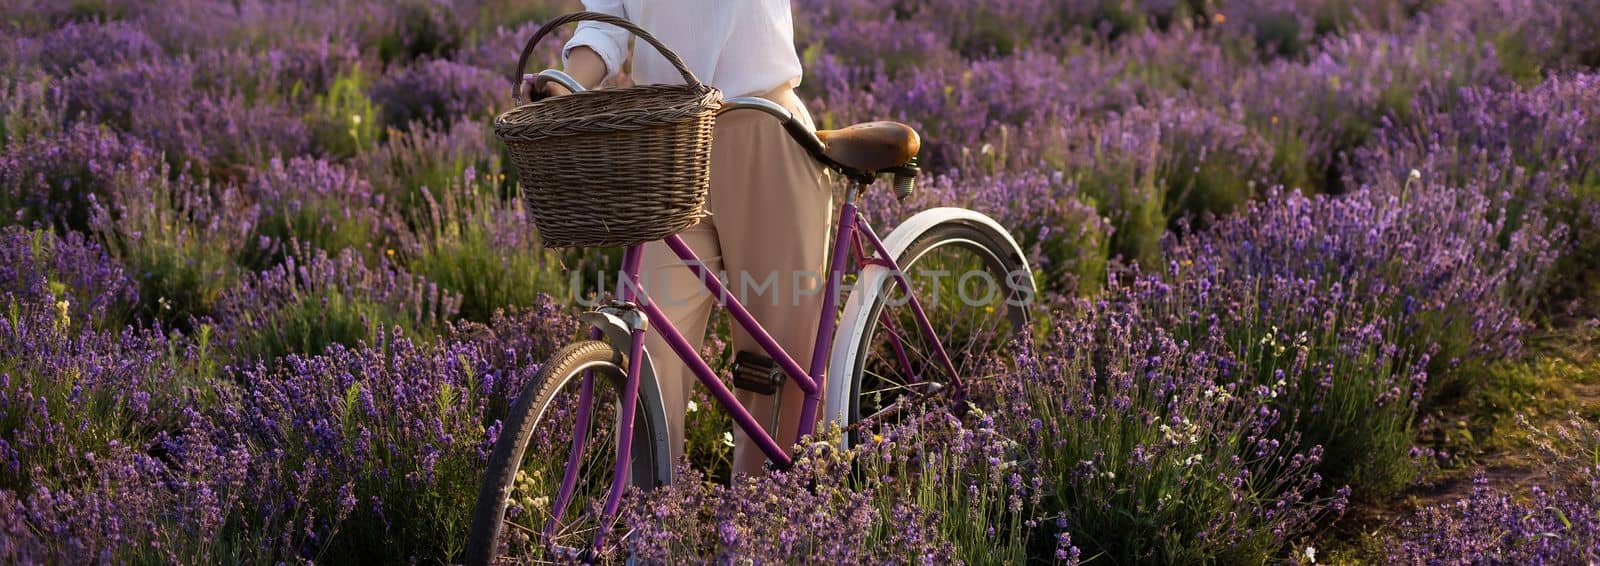 Beautiful young healthy woman with a white dress running joyfully through a lavender field holding a straw hat under the rays of the setting sun.